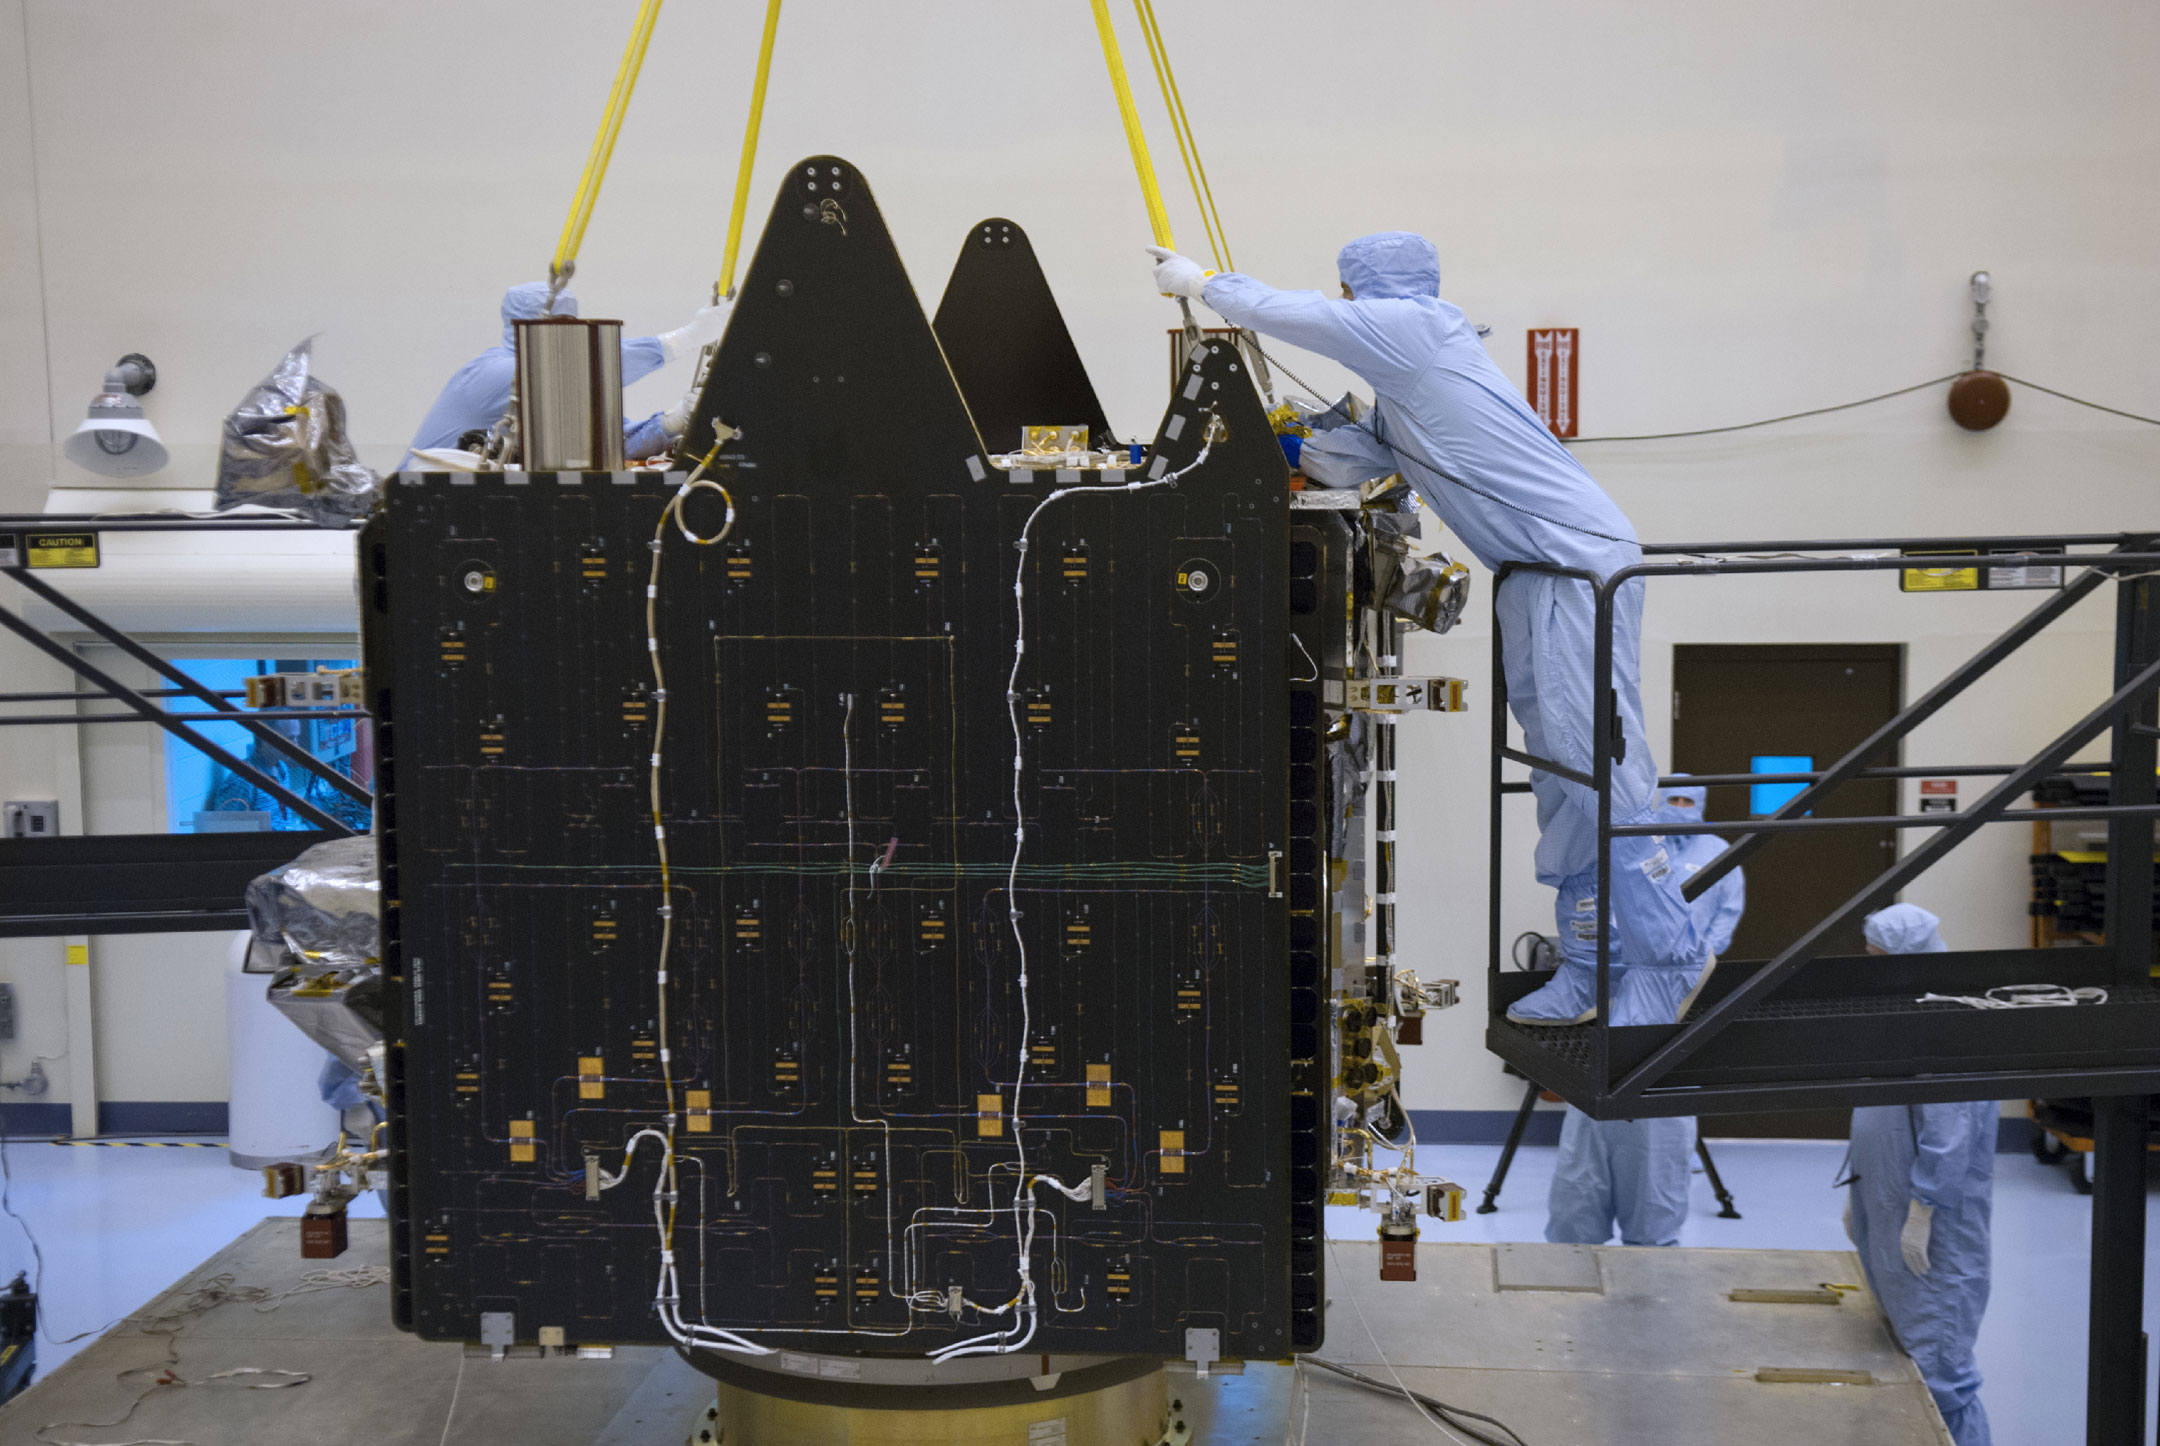 An engineer positions a sling on the MAVEN spacecraft inside the Payload Hazardous Servicing Facility. MAVEN will be prepared inside the facility for its scheduled November launch to Mars.